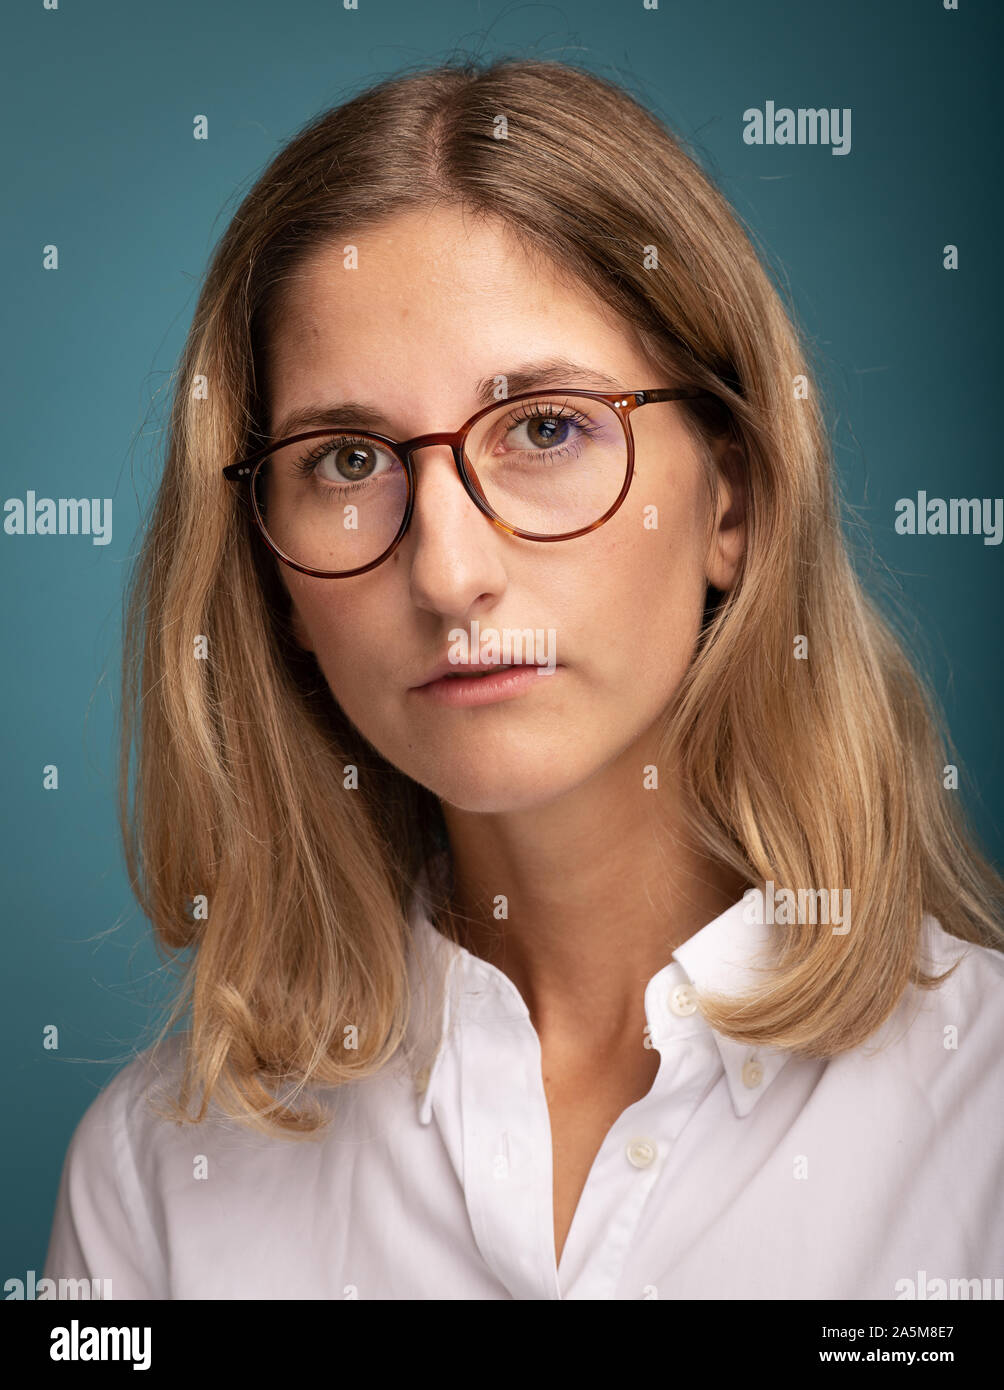 Portrait of a blonde businesswoman wearing glasses in front of blue background Stock Photo